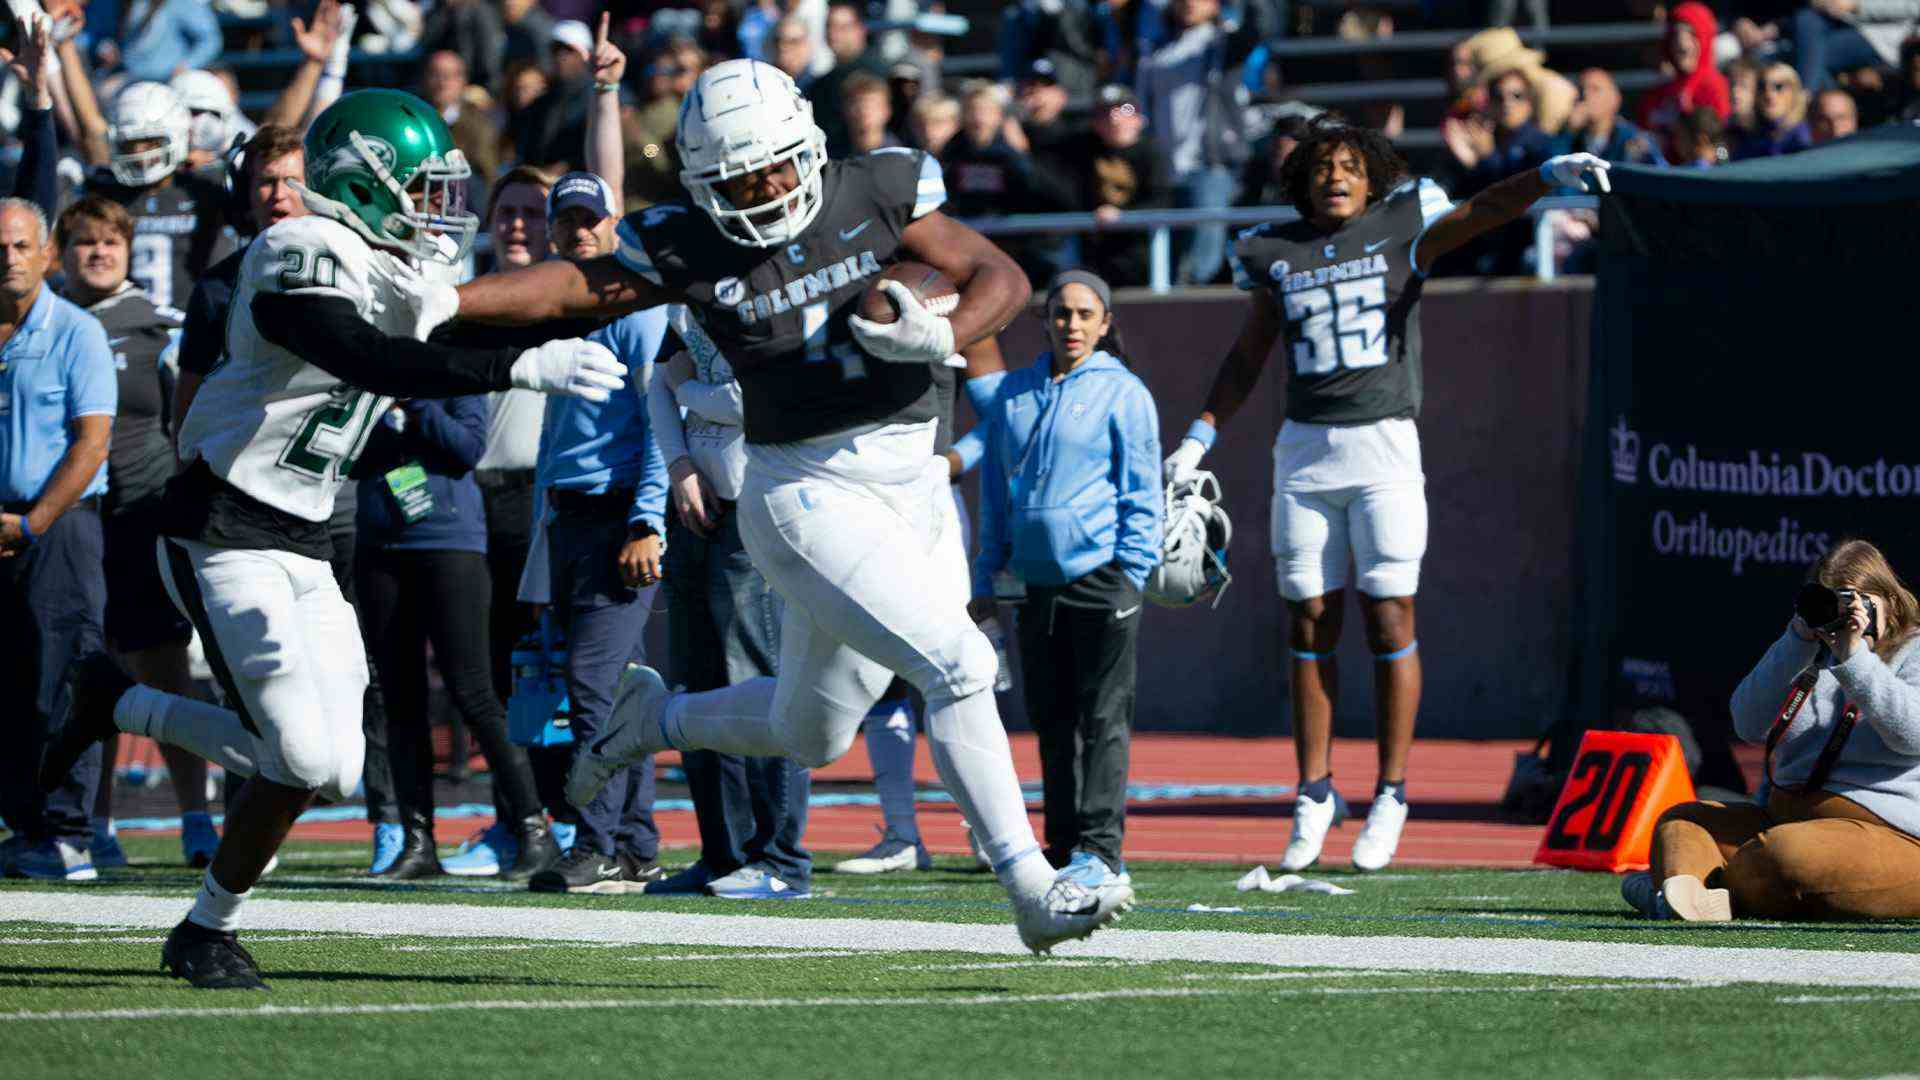 Columbia defeated Wagner in their first-ever meeting 28-7 in 2022.